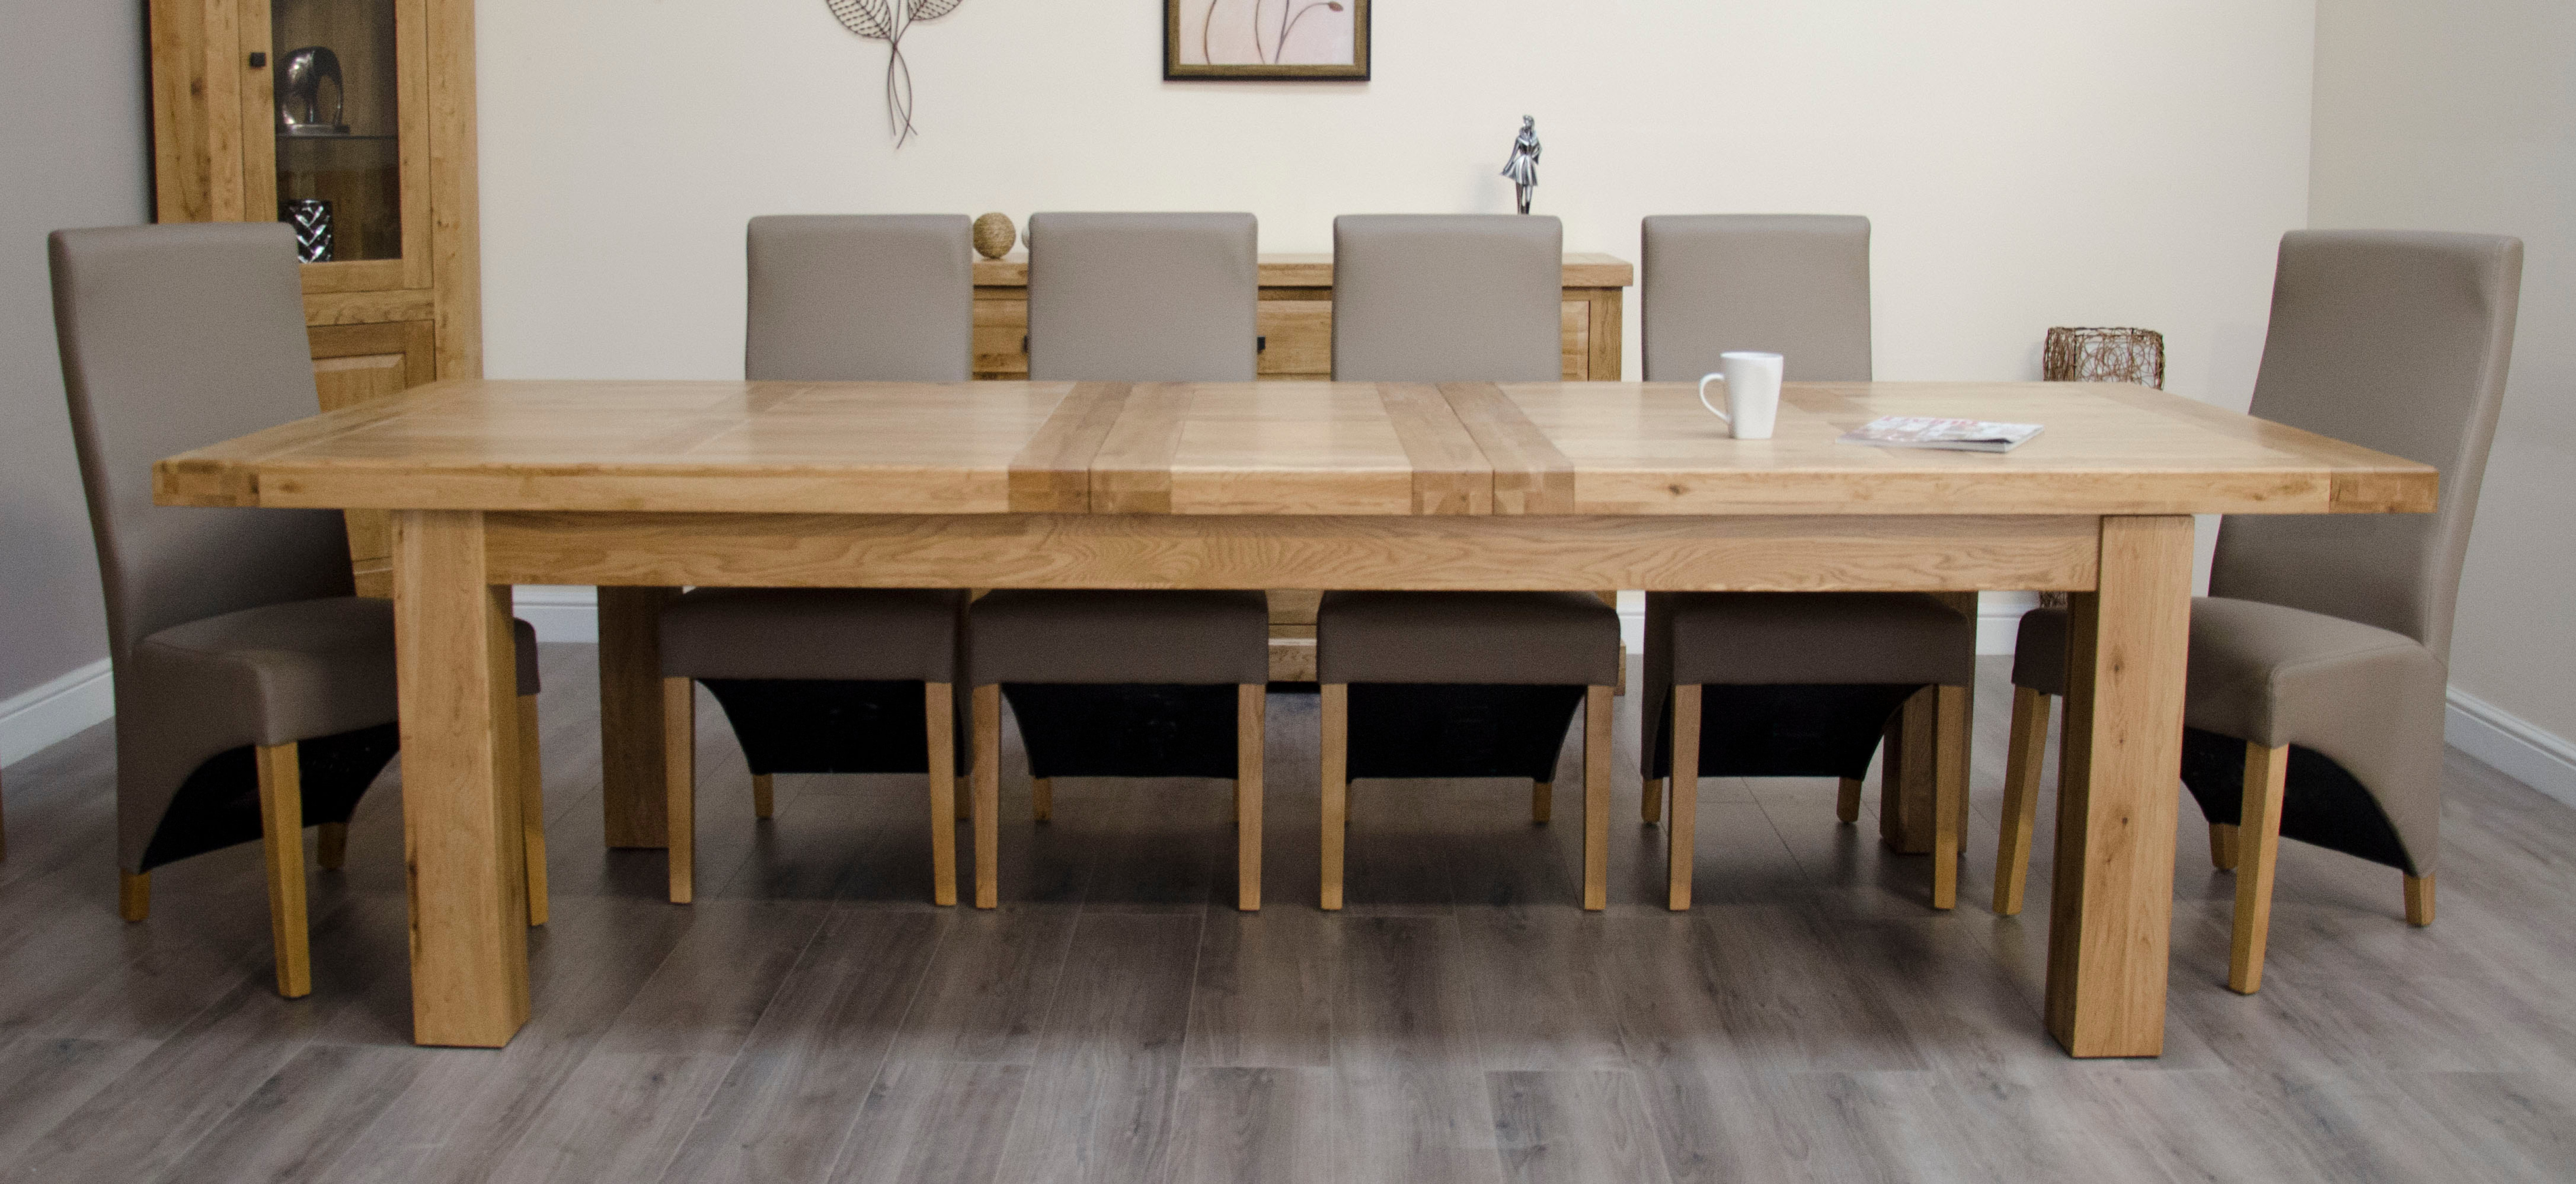 Large Dining Room Solid Wood Tables